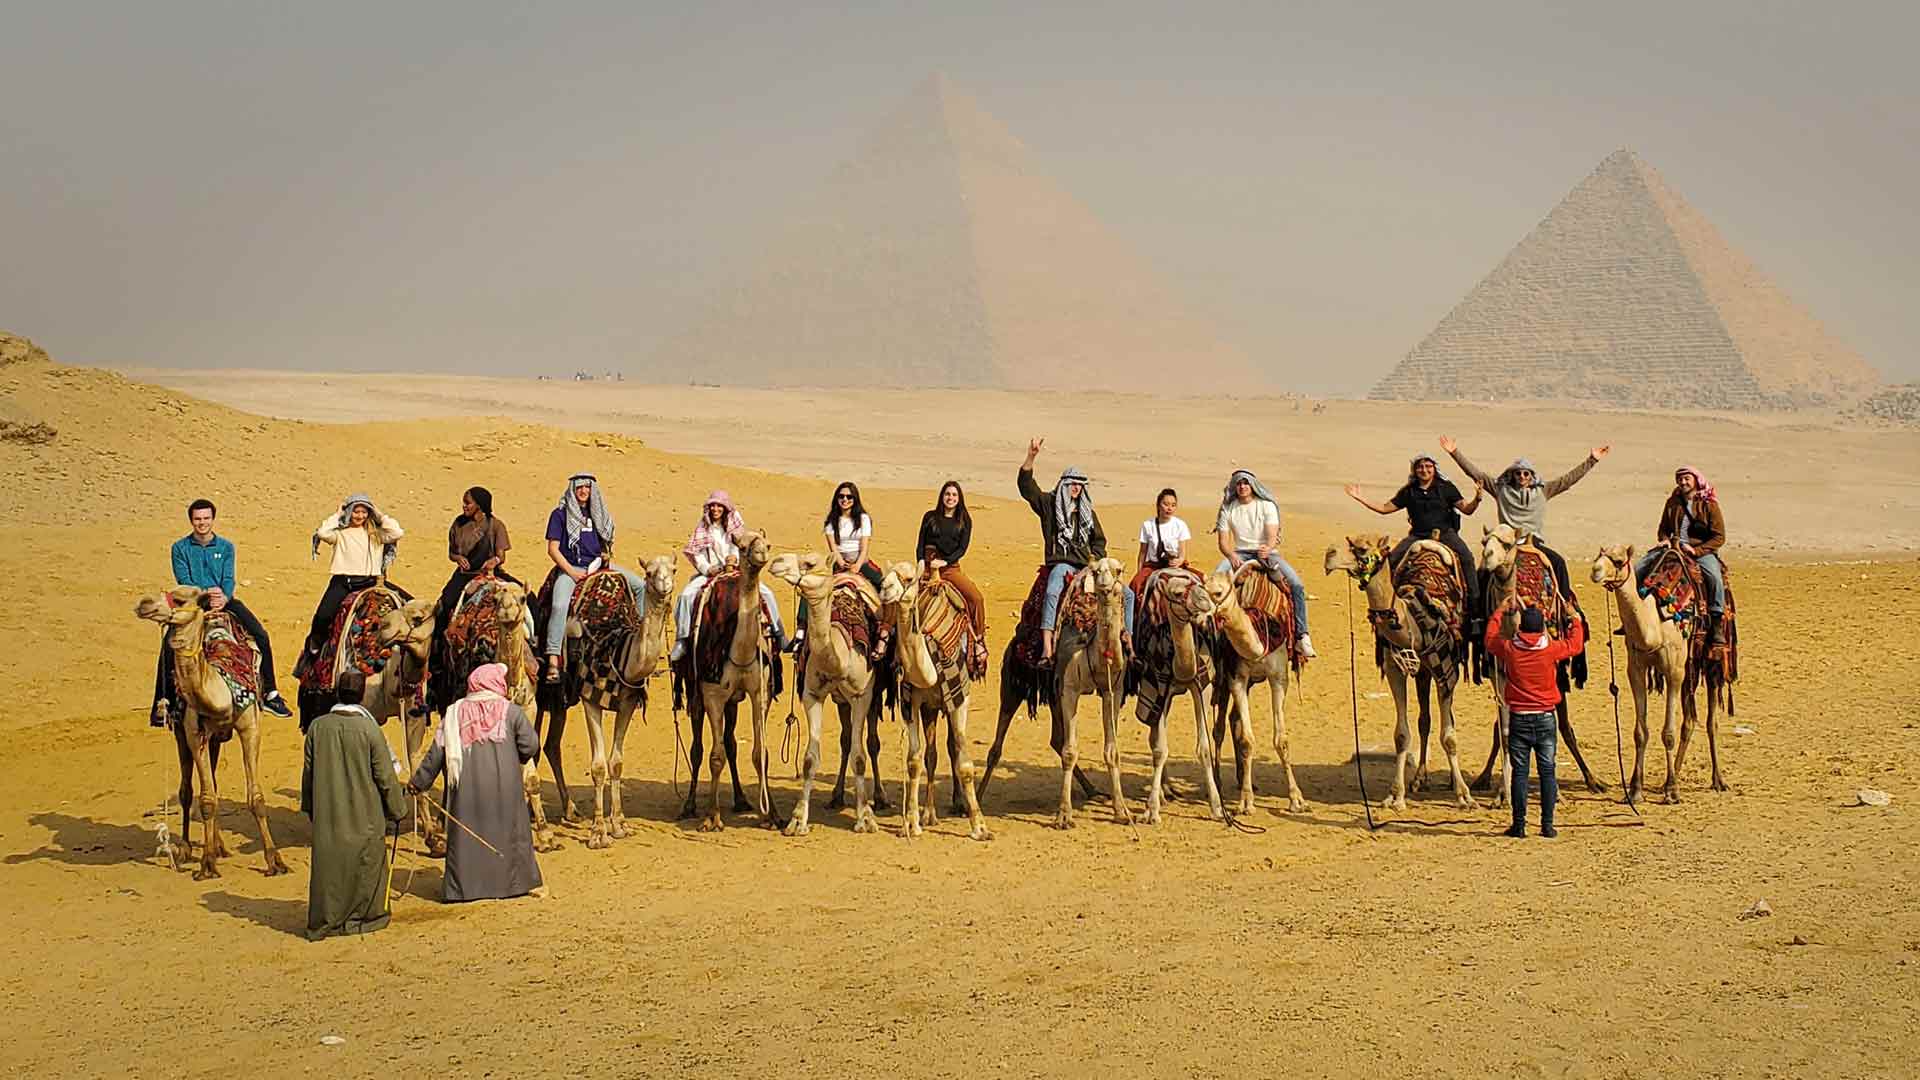 St. Thomas students riding camels in front of pyramids in Egypt